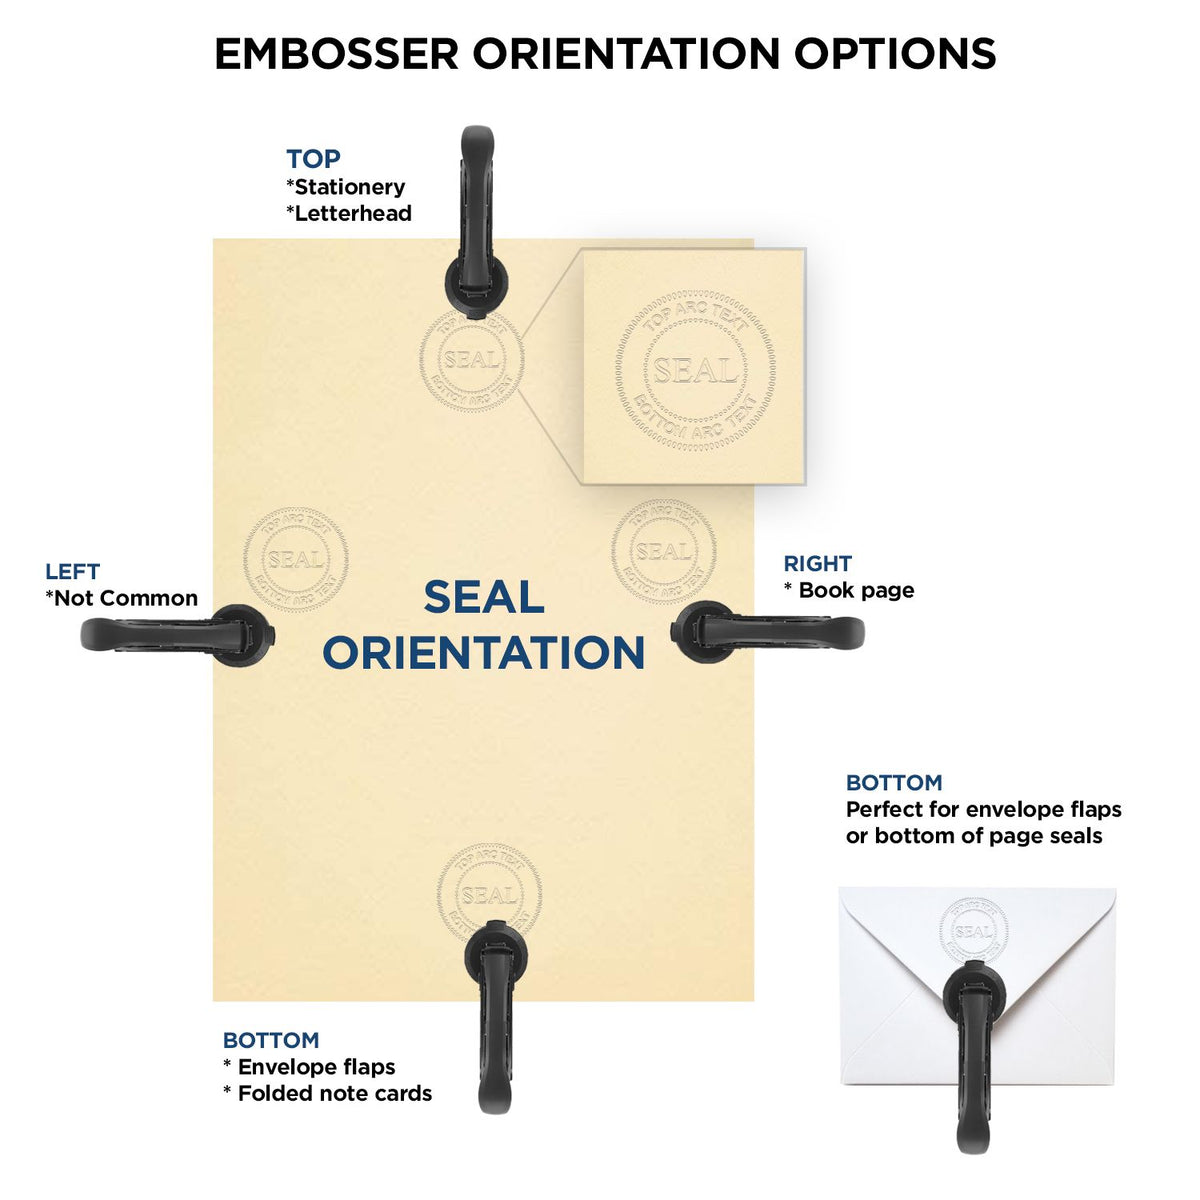 An infographic for the Hybrid Connecticut Land Surveyor Seal showing embosser orientation, this is showing examples of a top, bottom, right and left insert.